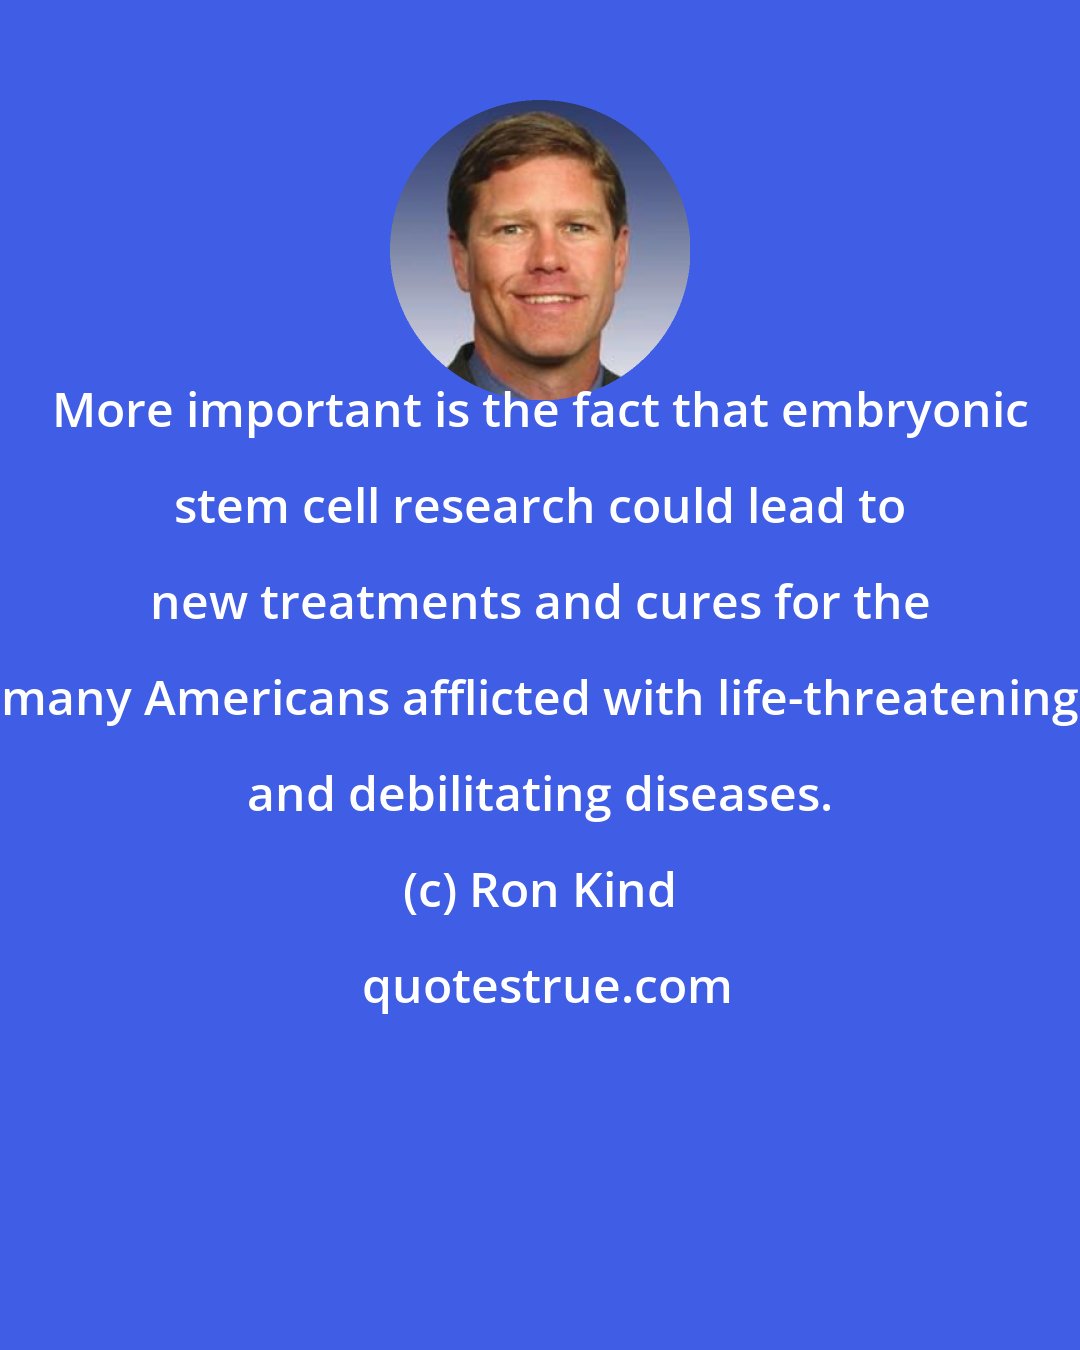 Ron Kind: More important is the fact that embryonic stem cell research could lead to new treatments and cures for the many Americans afflicted with life-threatening and debilitating diseases.